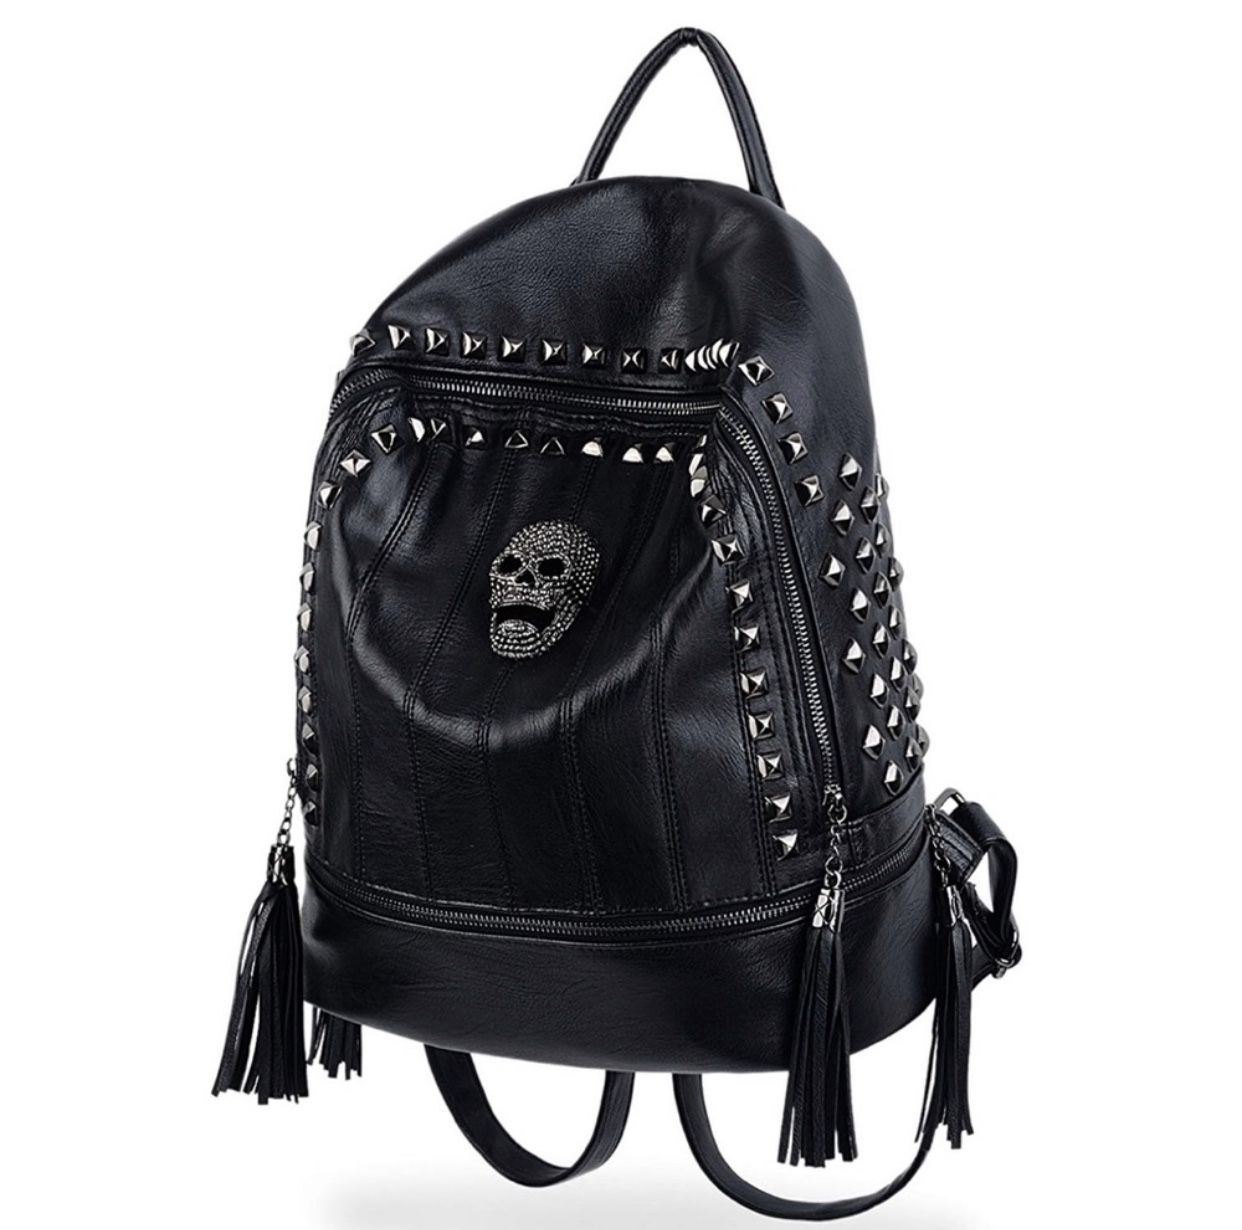 🎀 Skull Backpack PU Leather 🎀 NEW 🛍 SHIPPING AVAILABLE 🛍